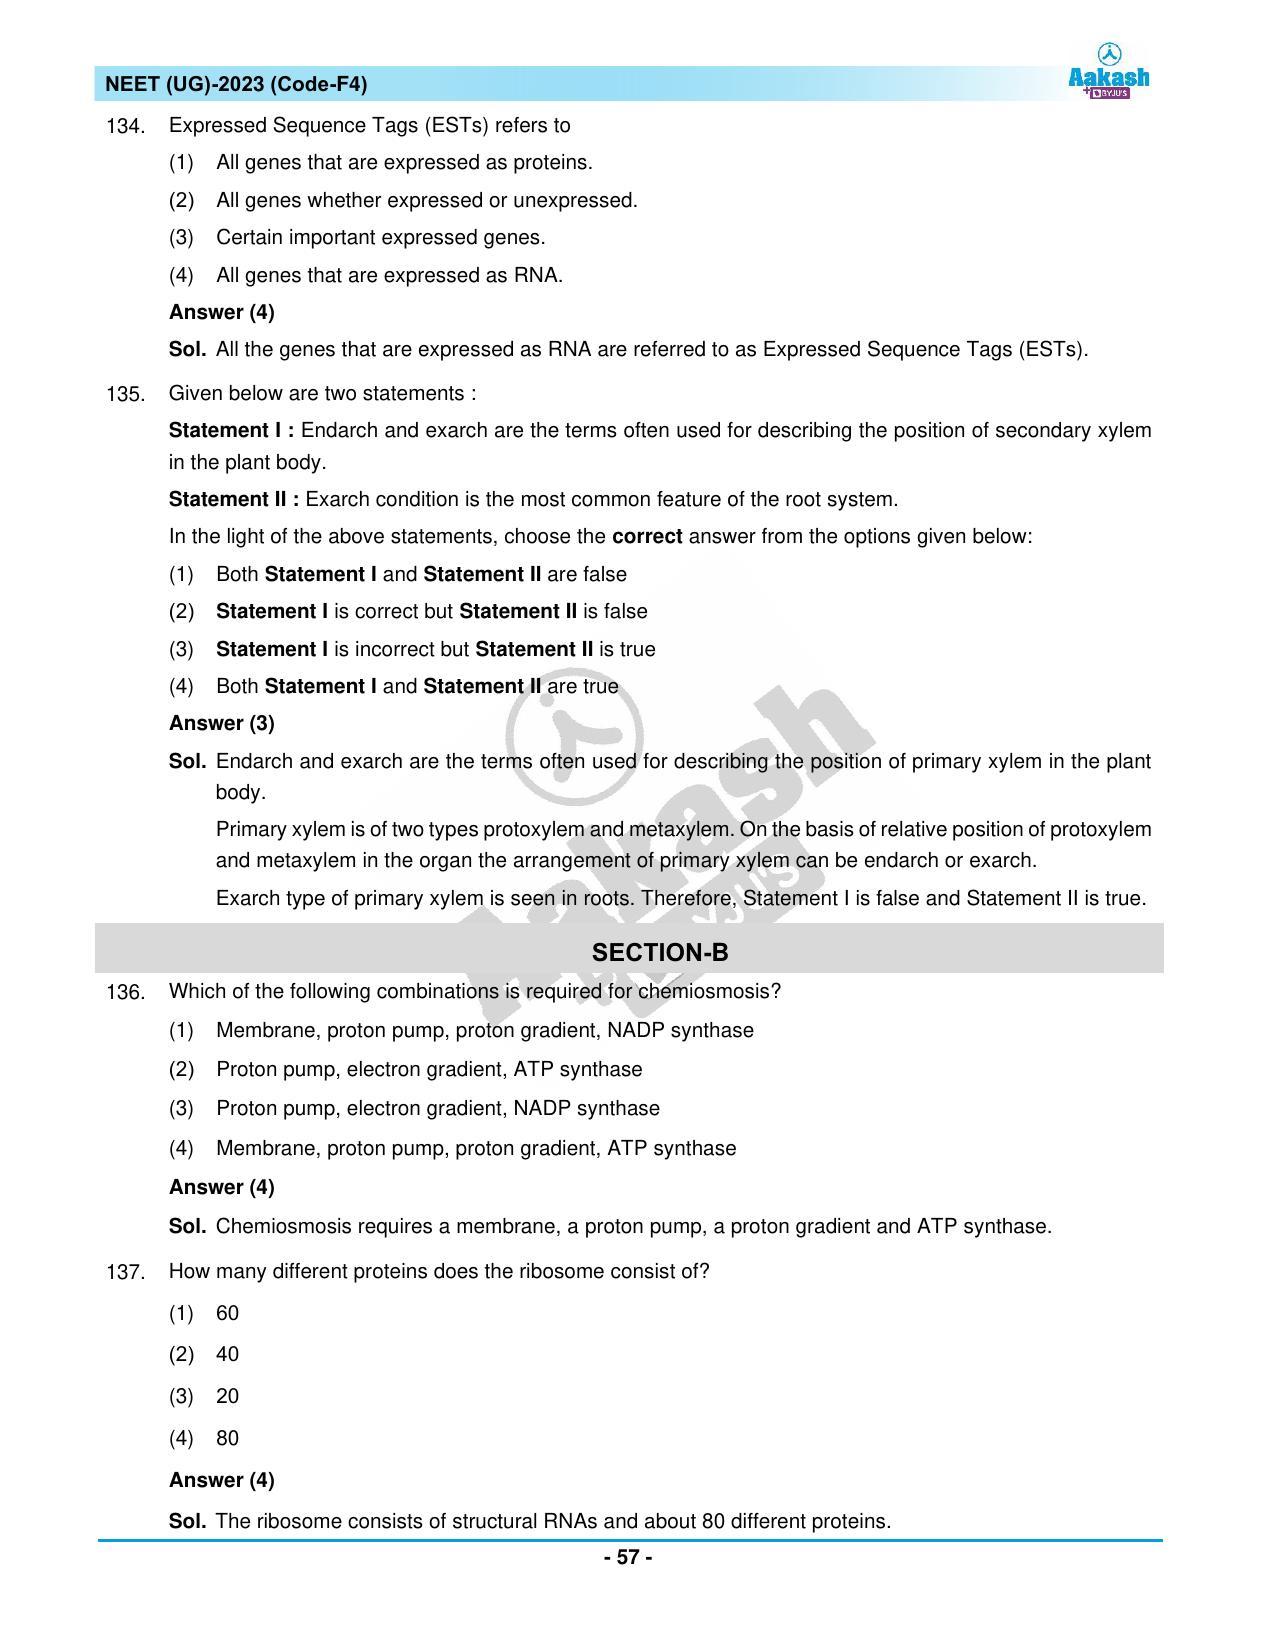 NEET 2023 Question Paper F4 - Page 57